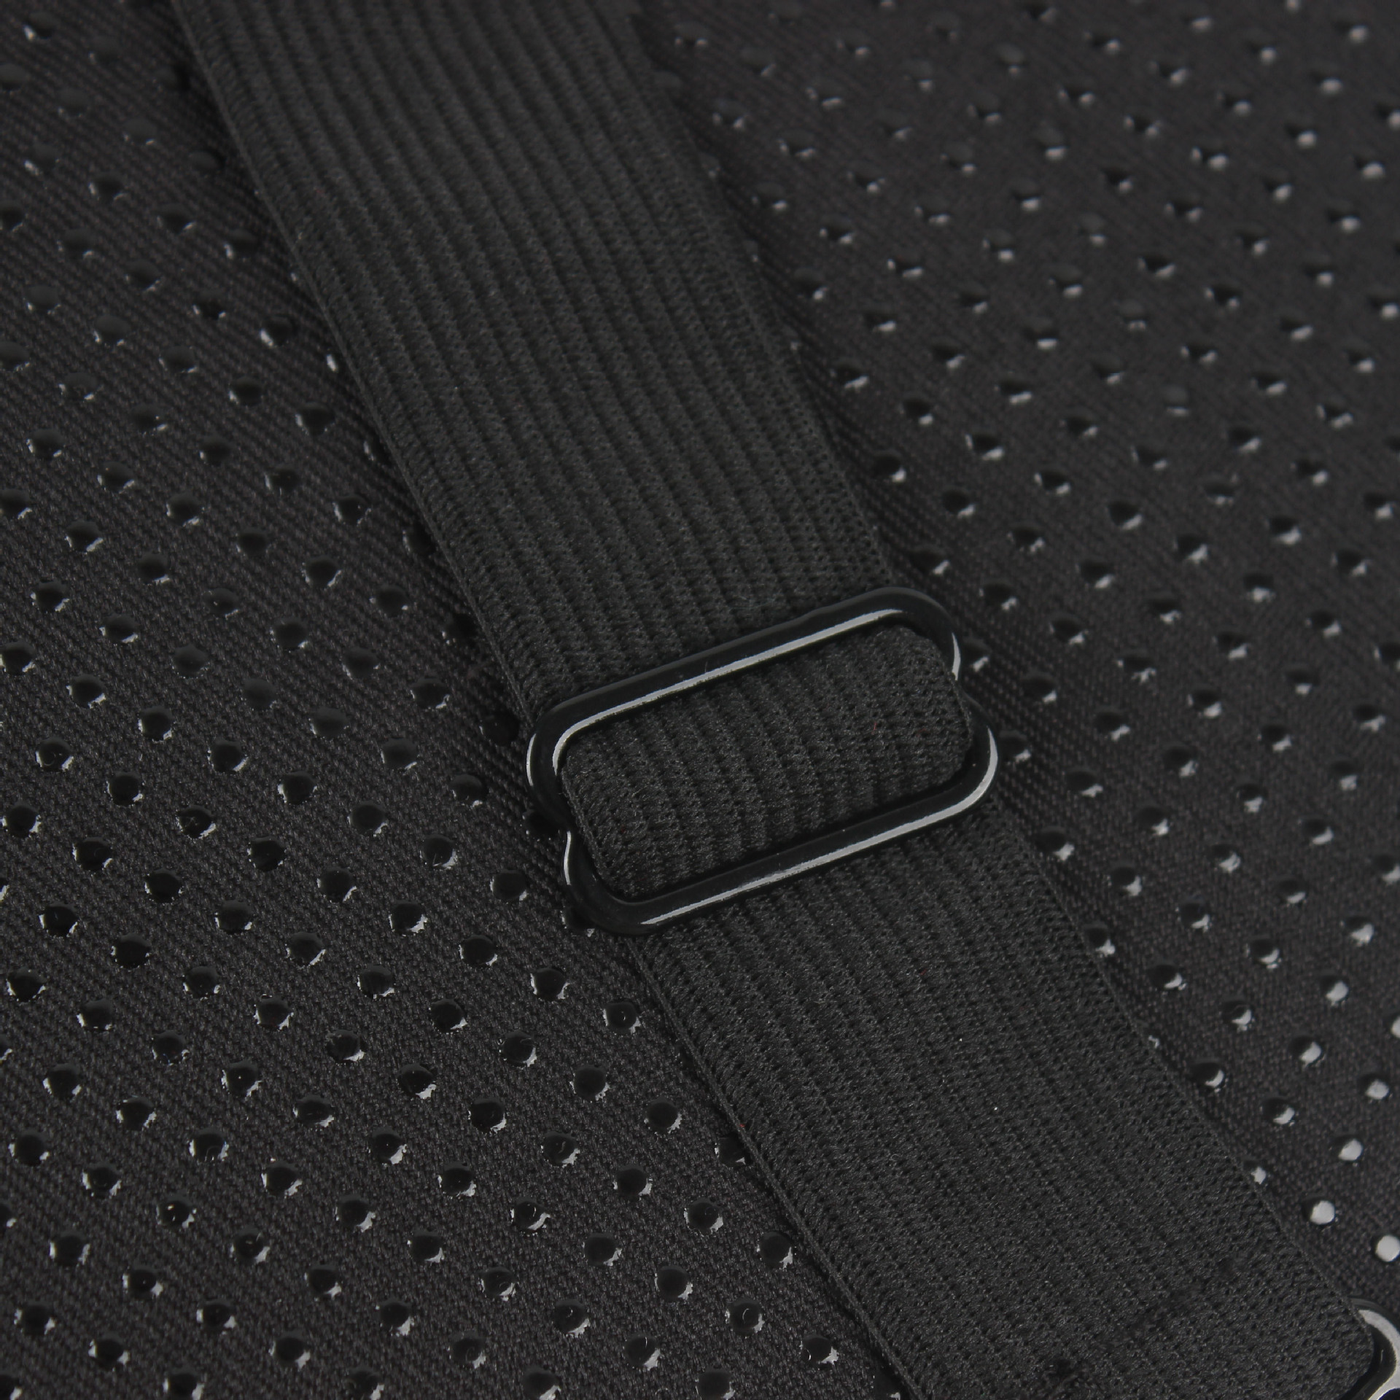 A close up of a black Motorcycle Seat Cushion Pad with a metal buckle providing shock absorption.